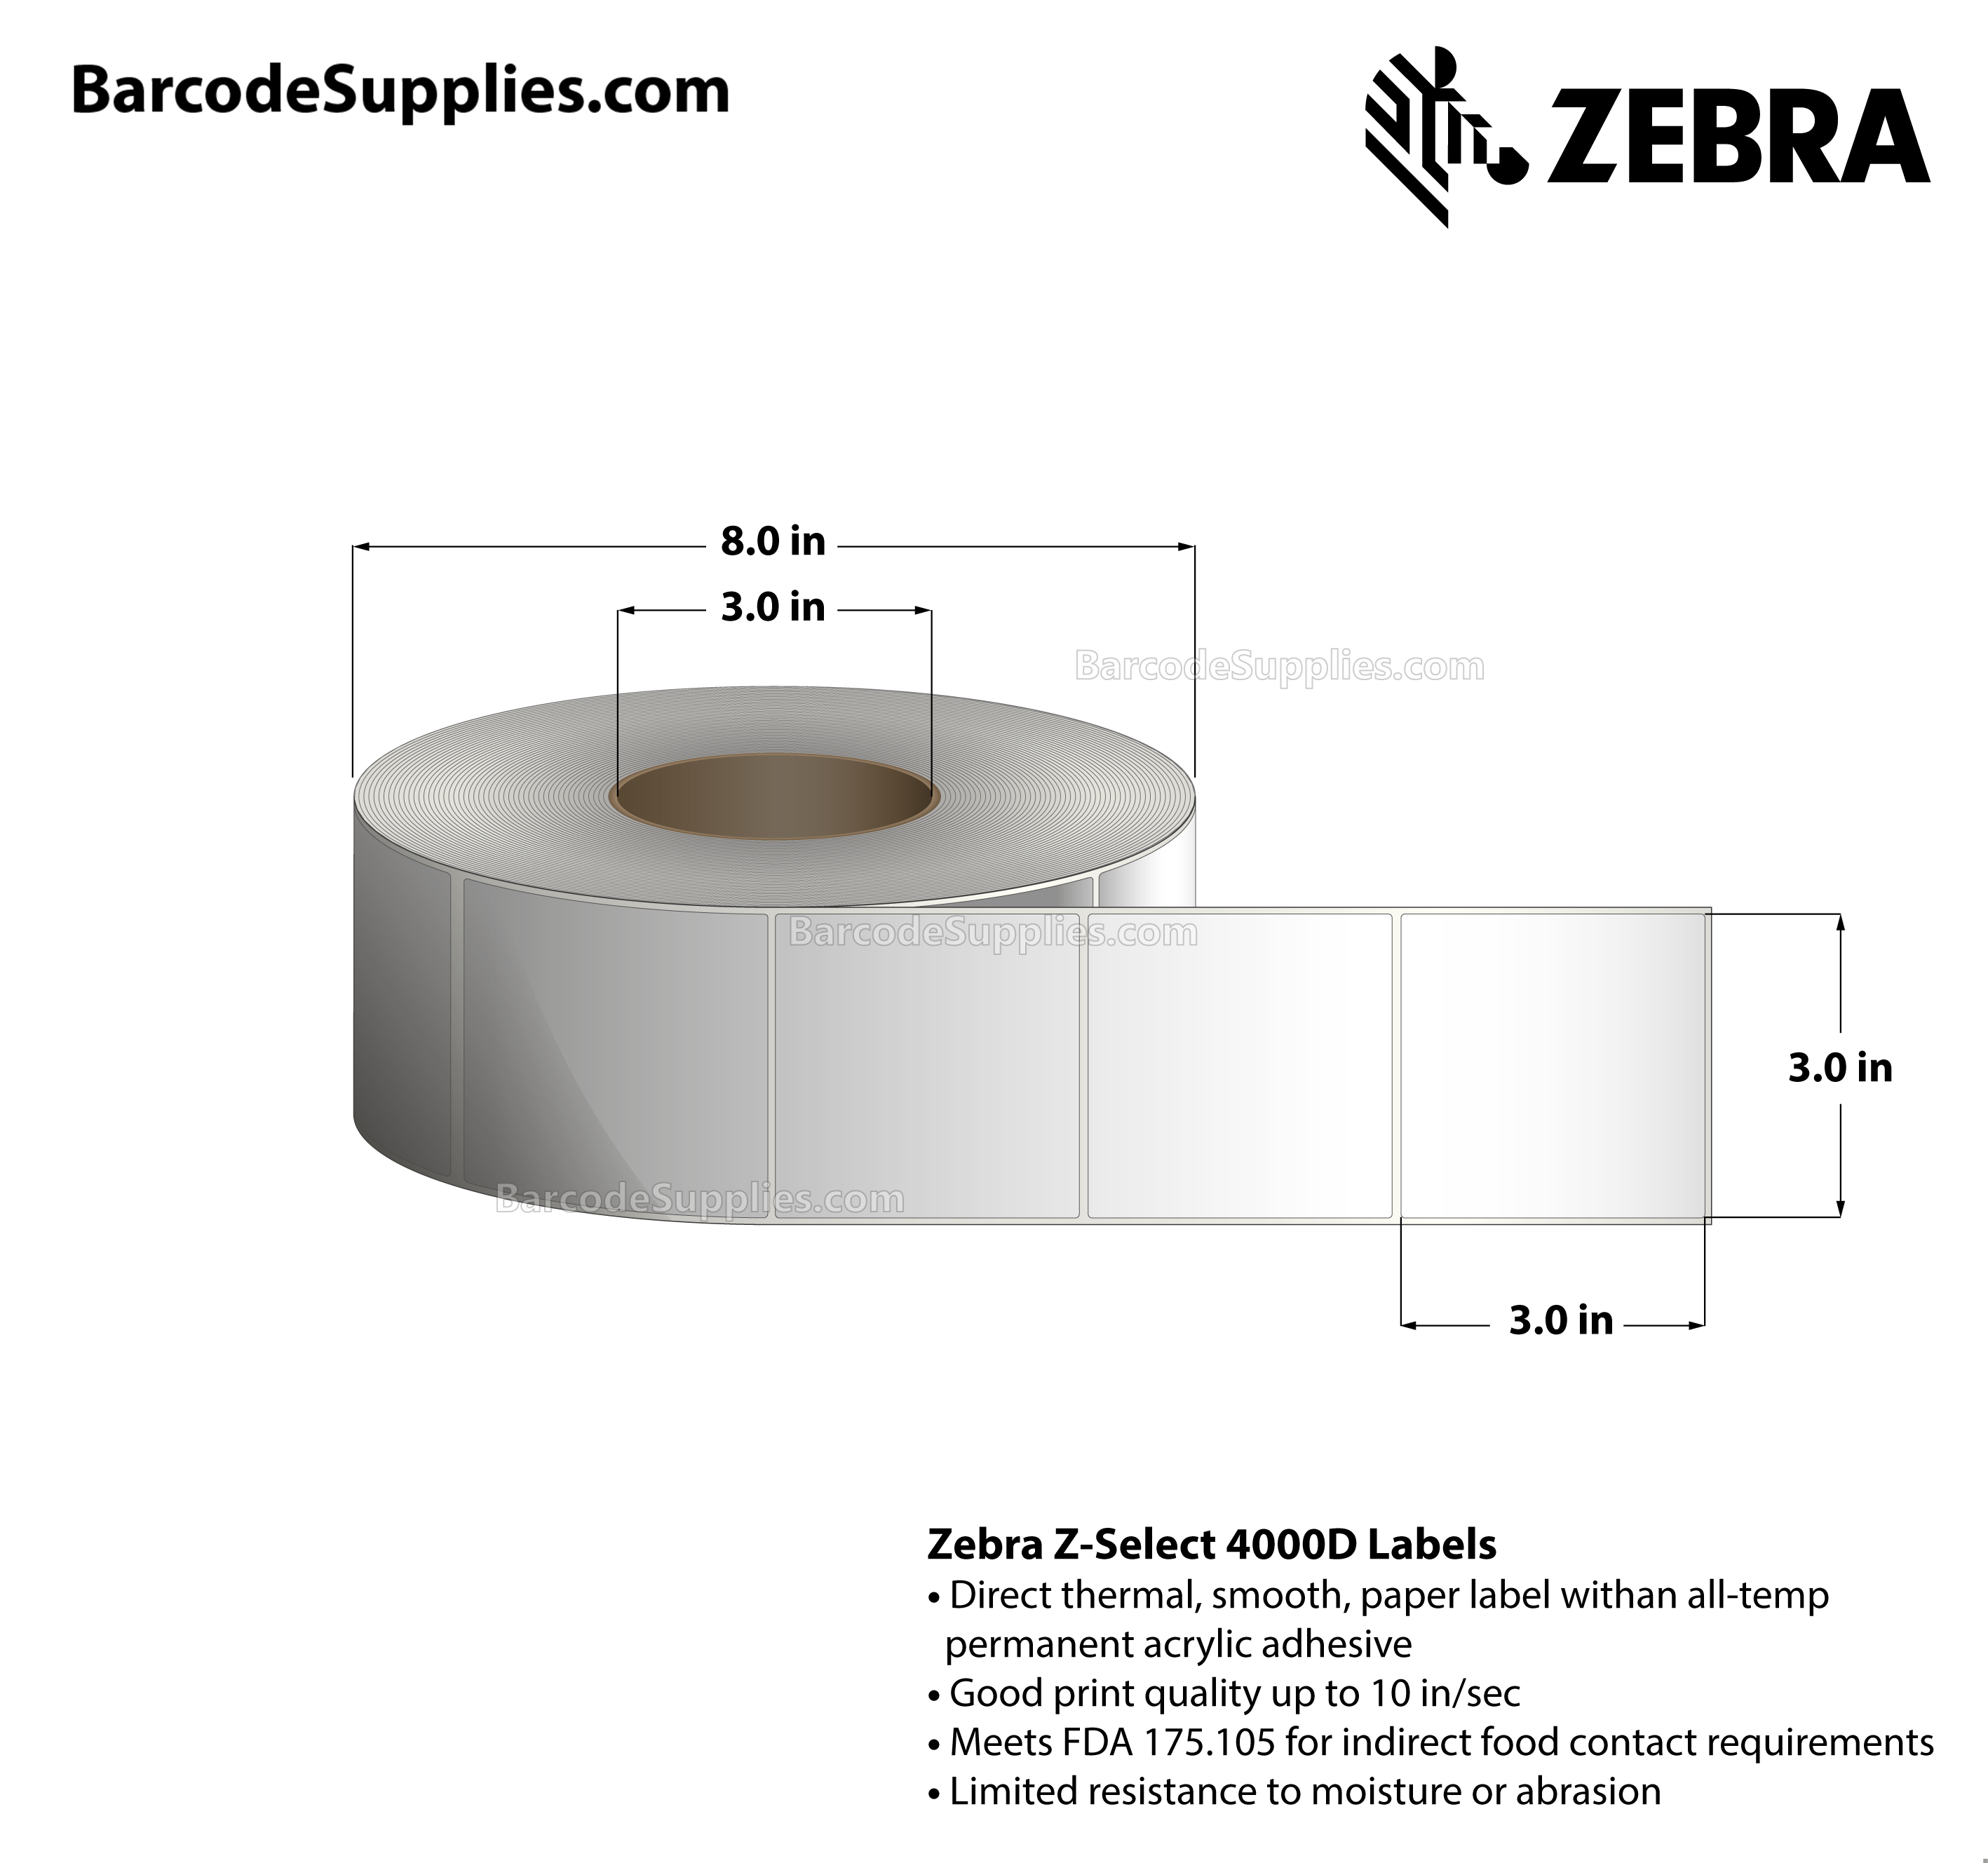 3 x 3 Direct Thermal White Z-Select 4000D Labels With All-Temp Adhesive - Not Perforated - 1840 Labels Per Roll - Carton Of 6 Rolls - 11040 Labels Total - MPN: 84086